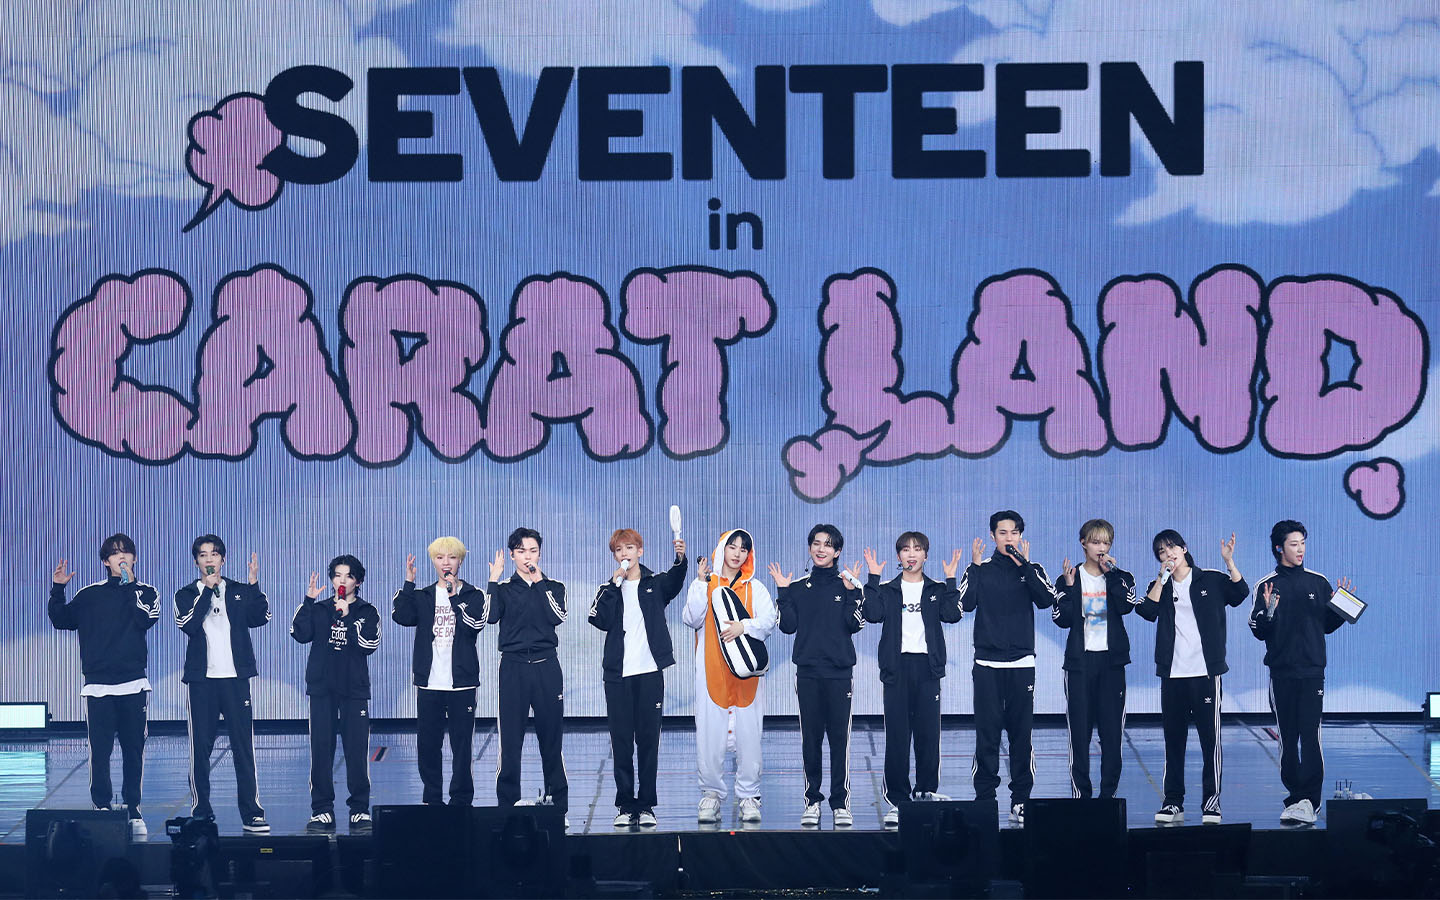 Seventeen debuted a new song in Macao. Listen to it here